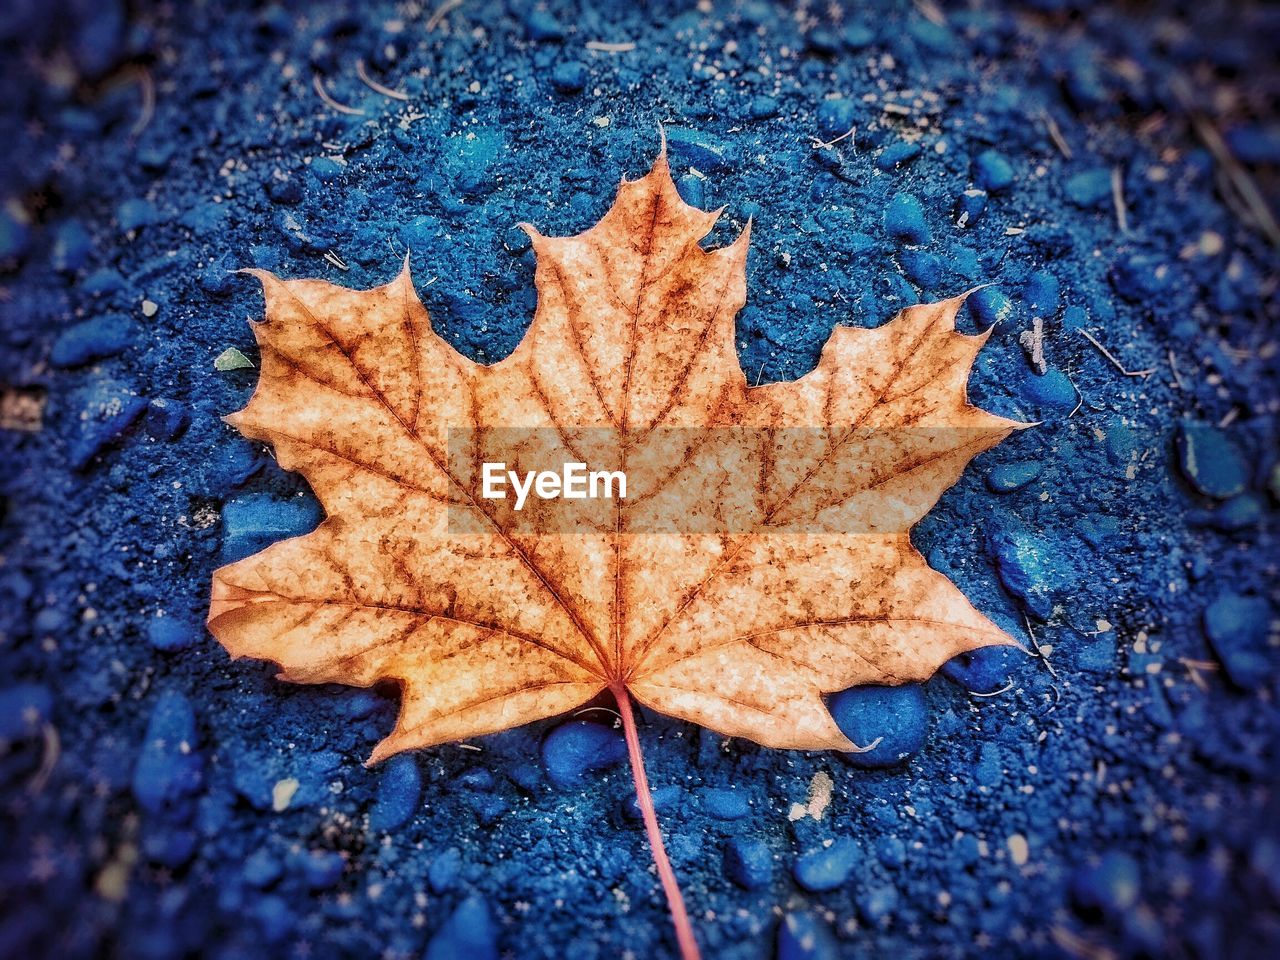 CLOSE-UP OF DRY MAPLE LEAF ON THE GROUND